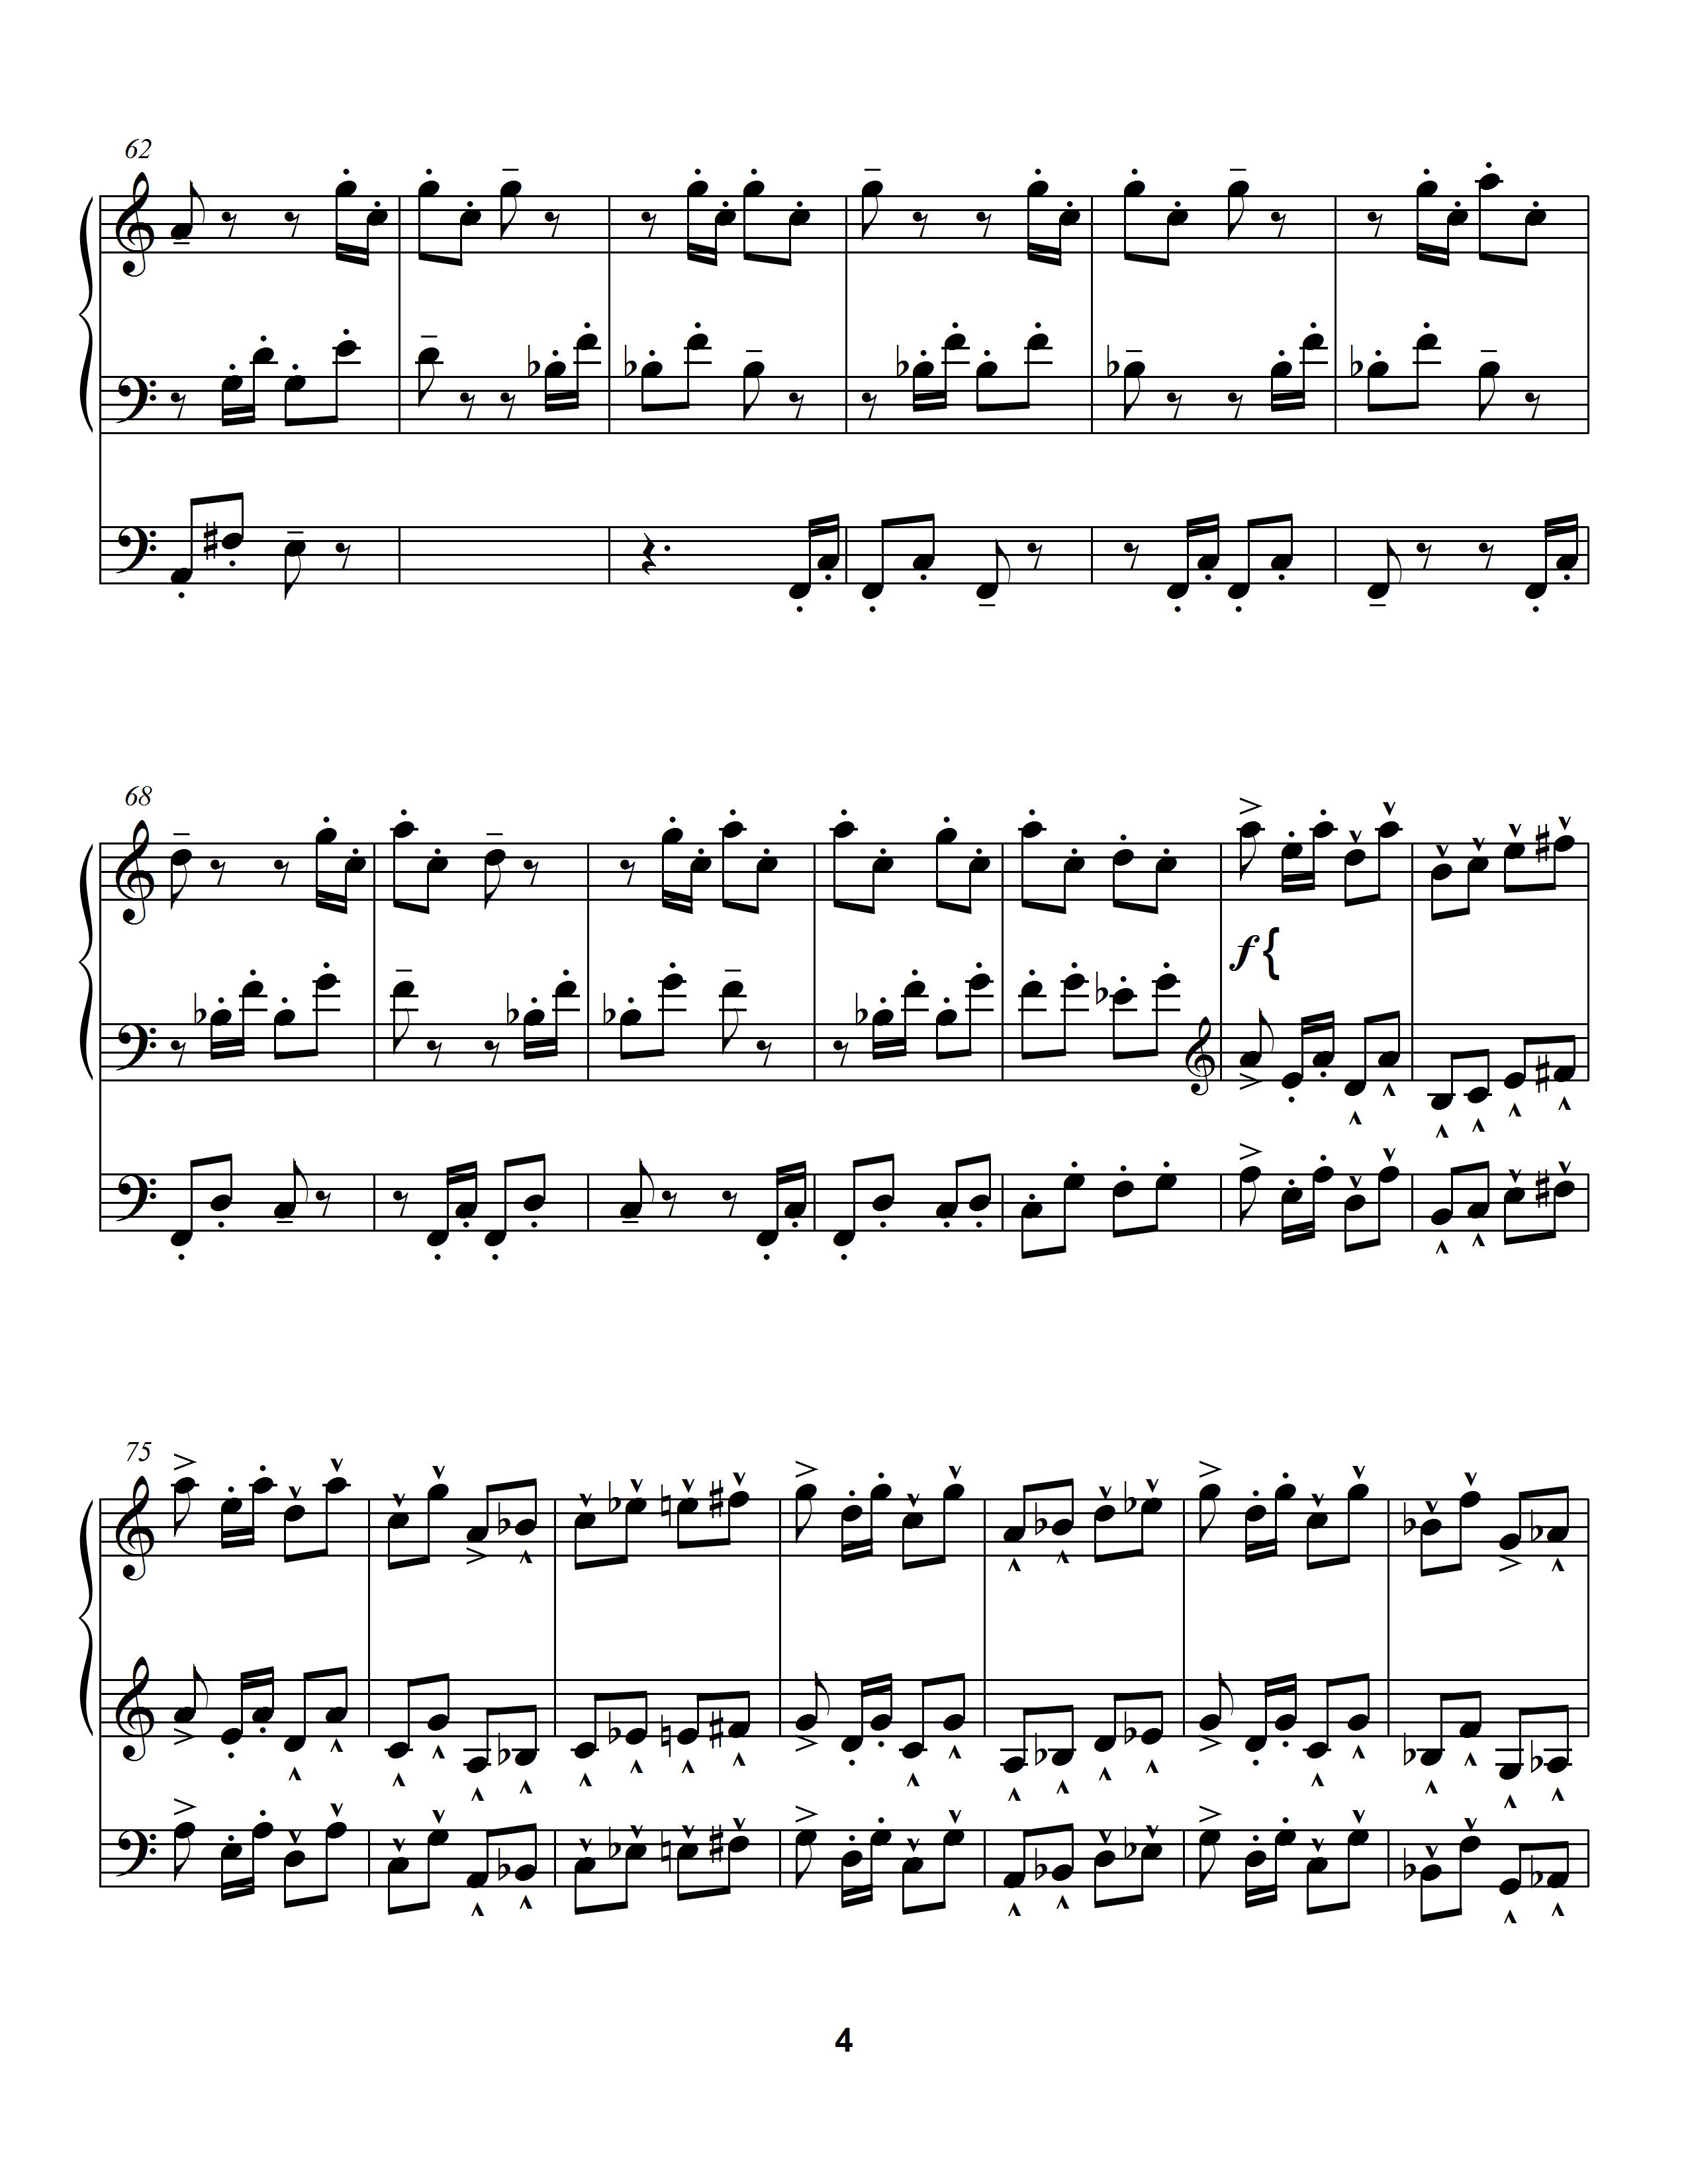 For Eternity: Fanfare for Organ page four